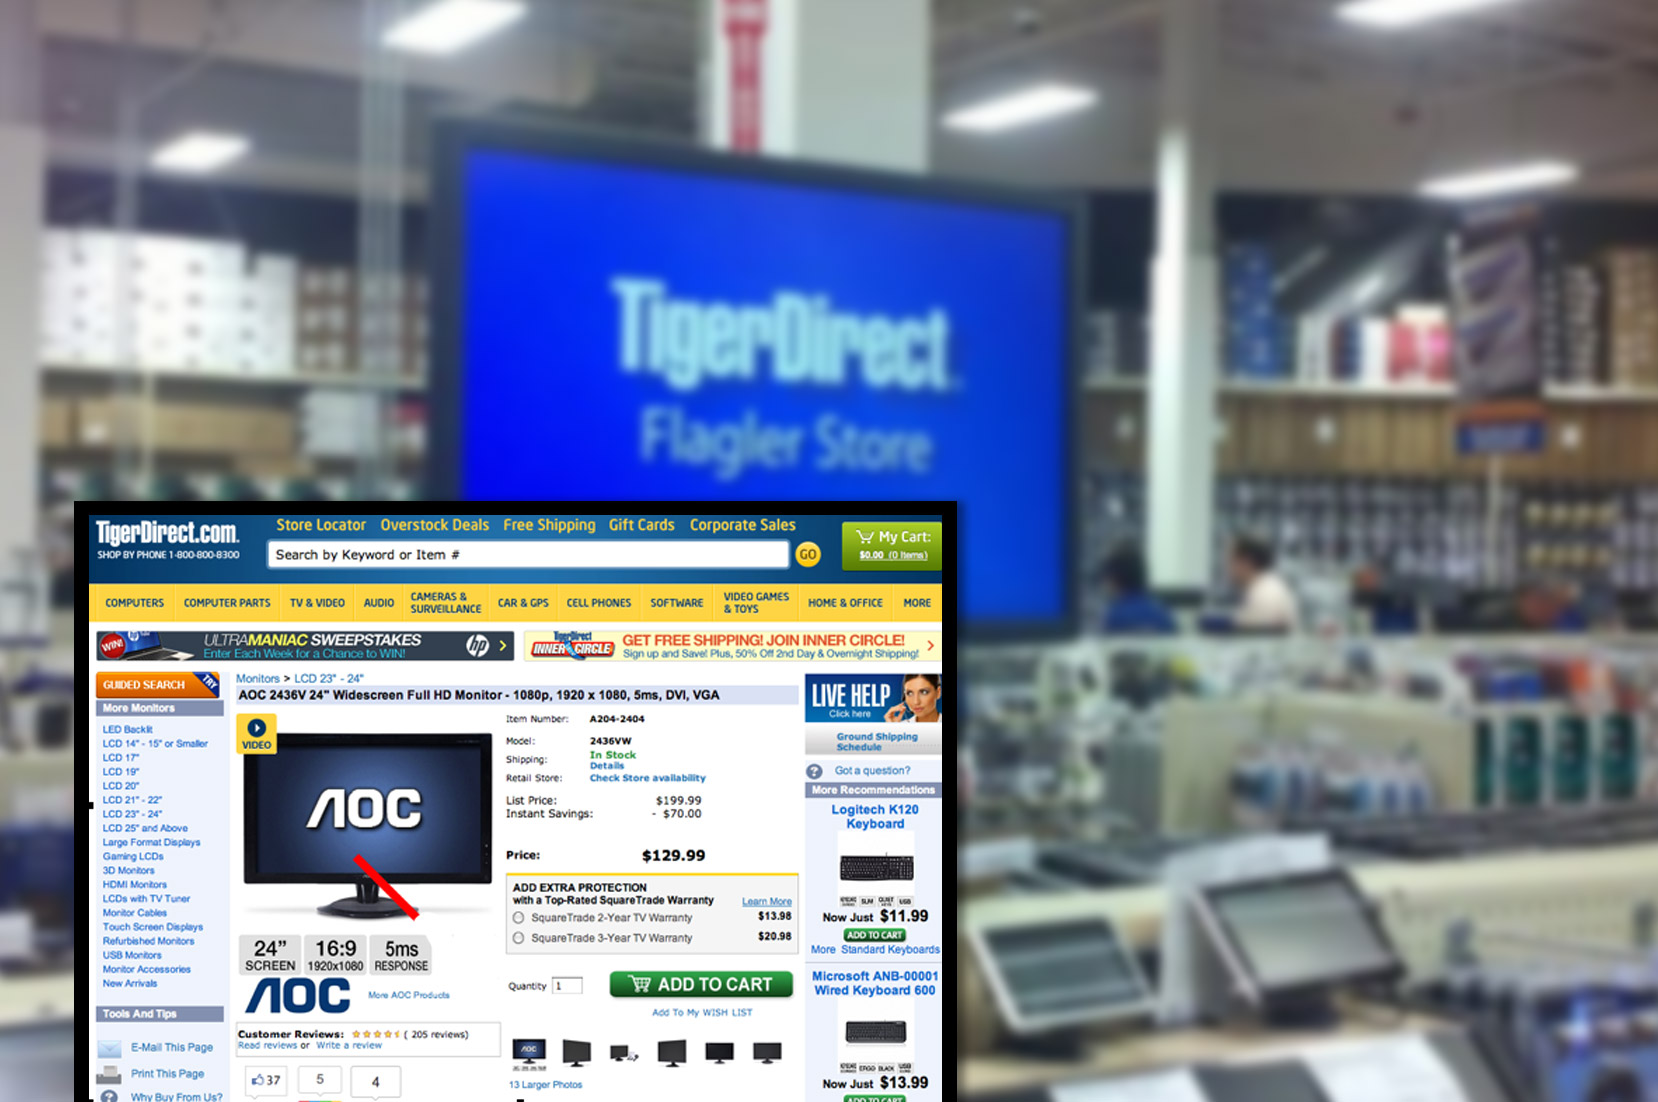 tigerdirect-comproduct-pricing-information-and-image-scraping-services